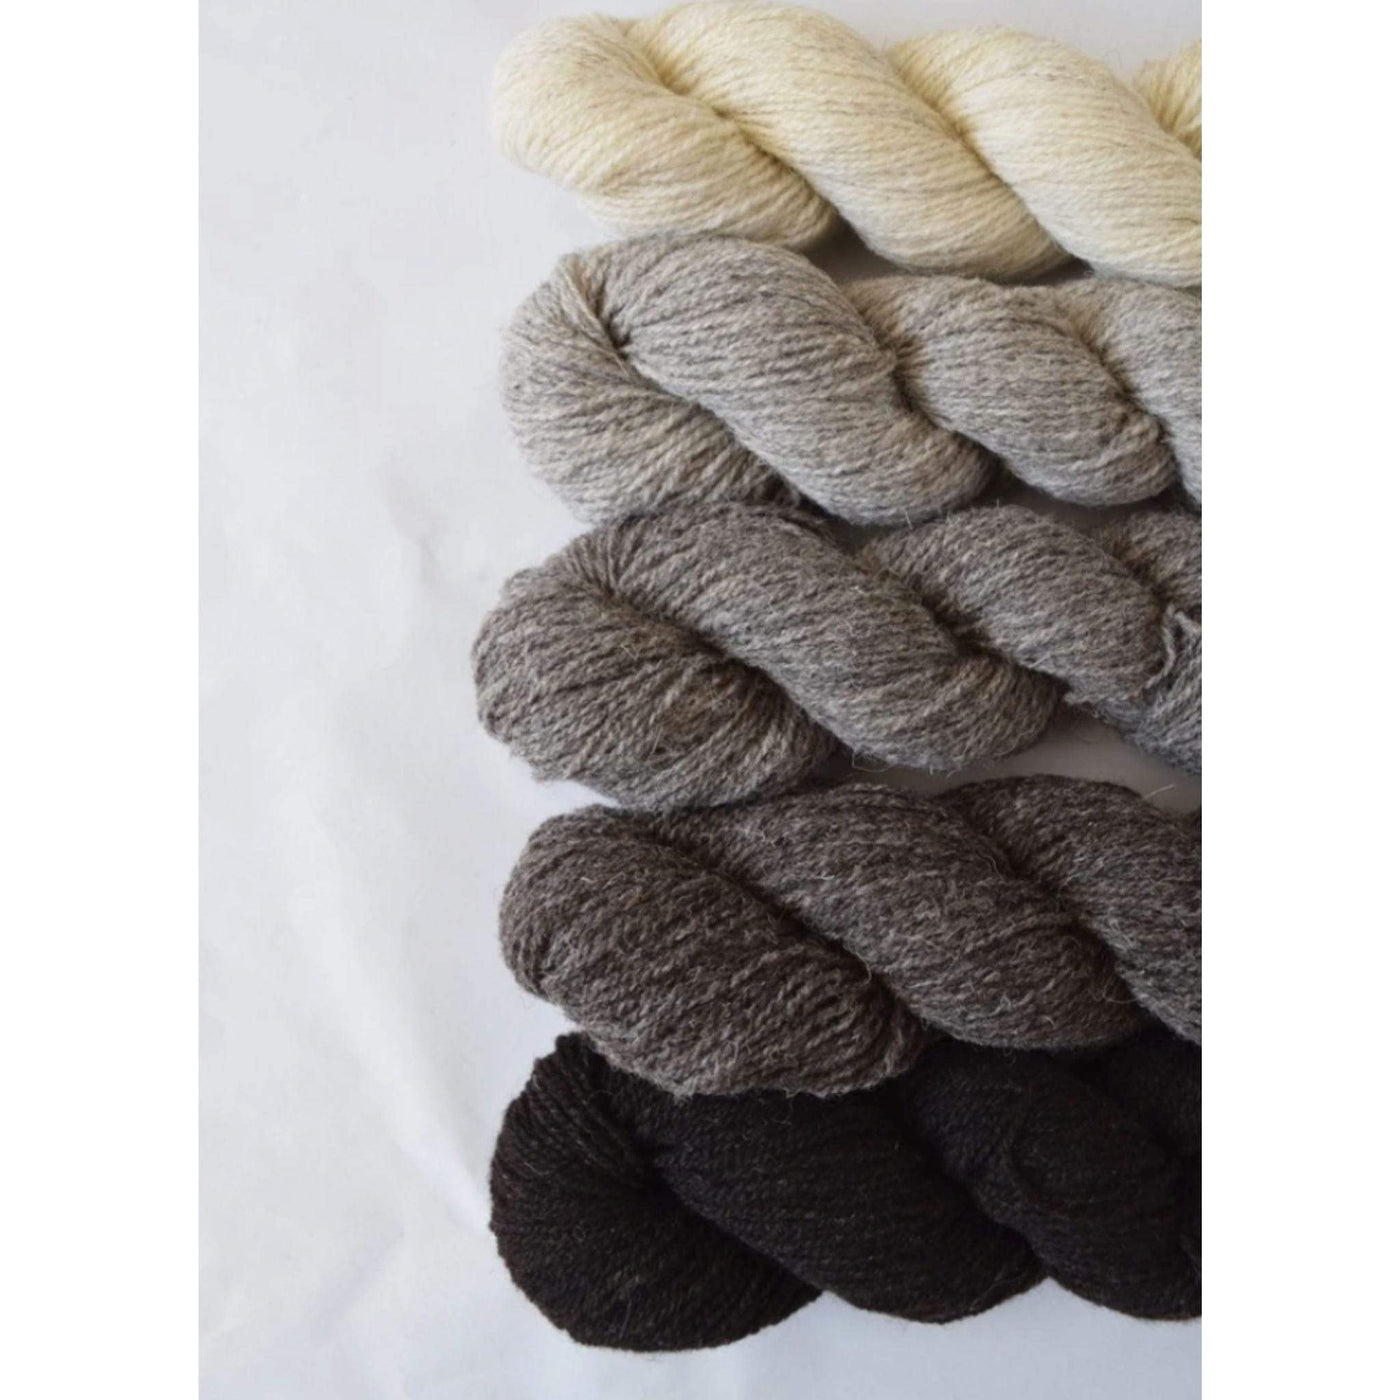 The Woolly Thistle Ram Jam Sport 2ply yarn from Daughter of a Shepherd in 5 colors: Natural White, Light Grey, Inbetween Grey, Mid Grey, Natural Black